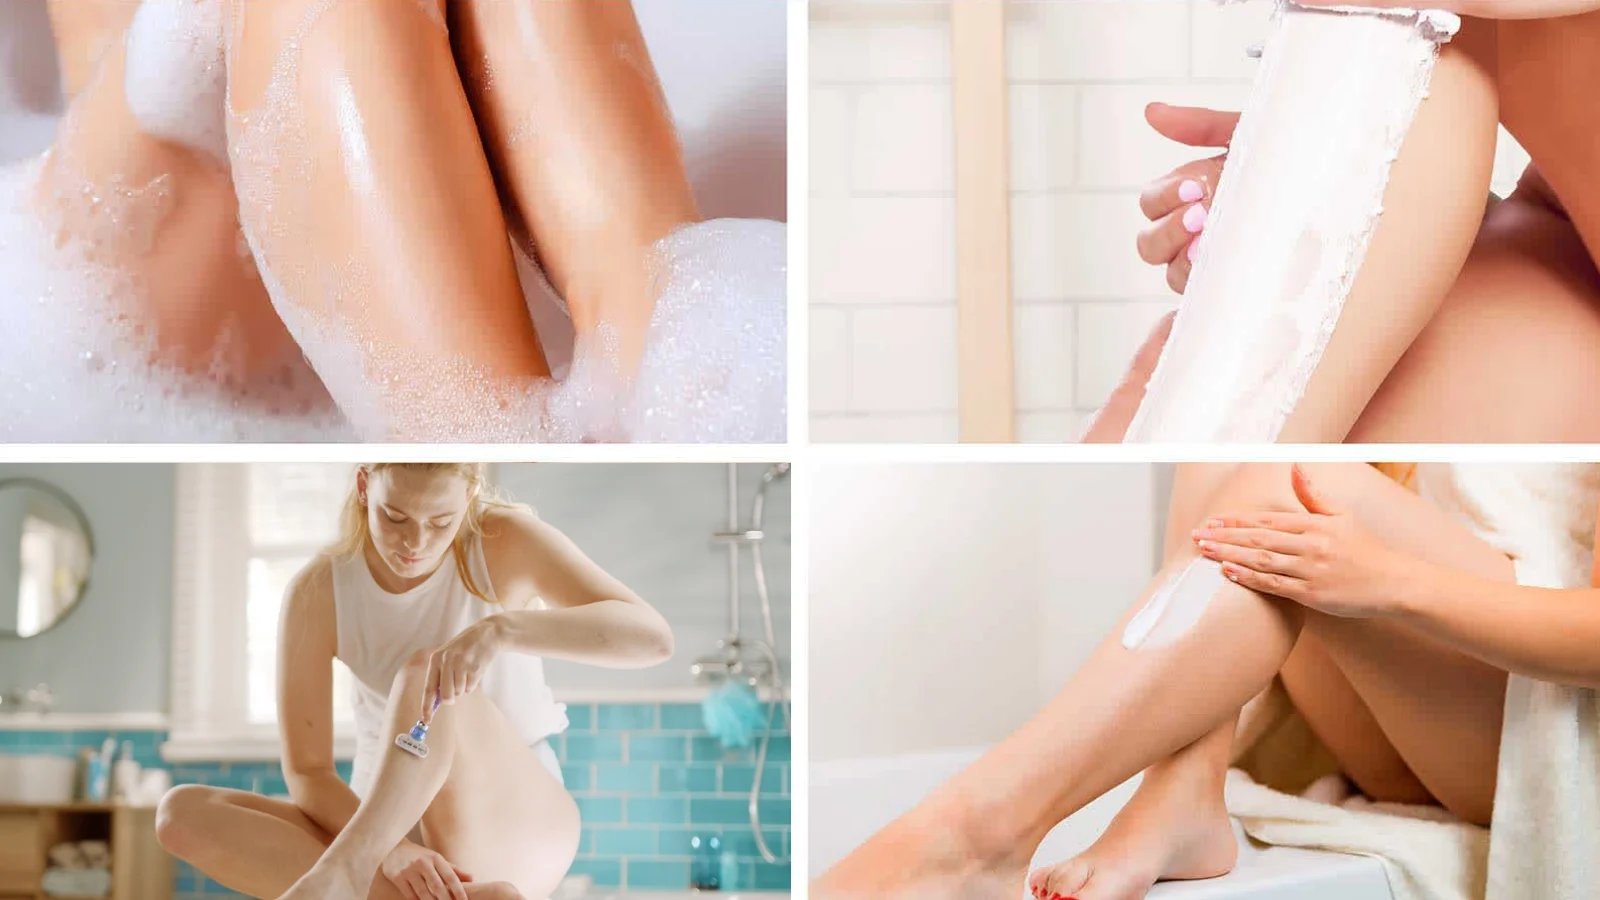 Female legs in a bubbly bath, woman wiping off hair removal cream from her leg, woman shaving with a razor in a bathroom, woman applying cream to her leg